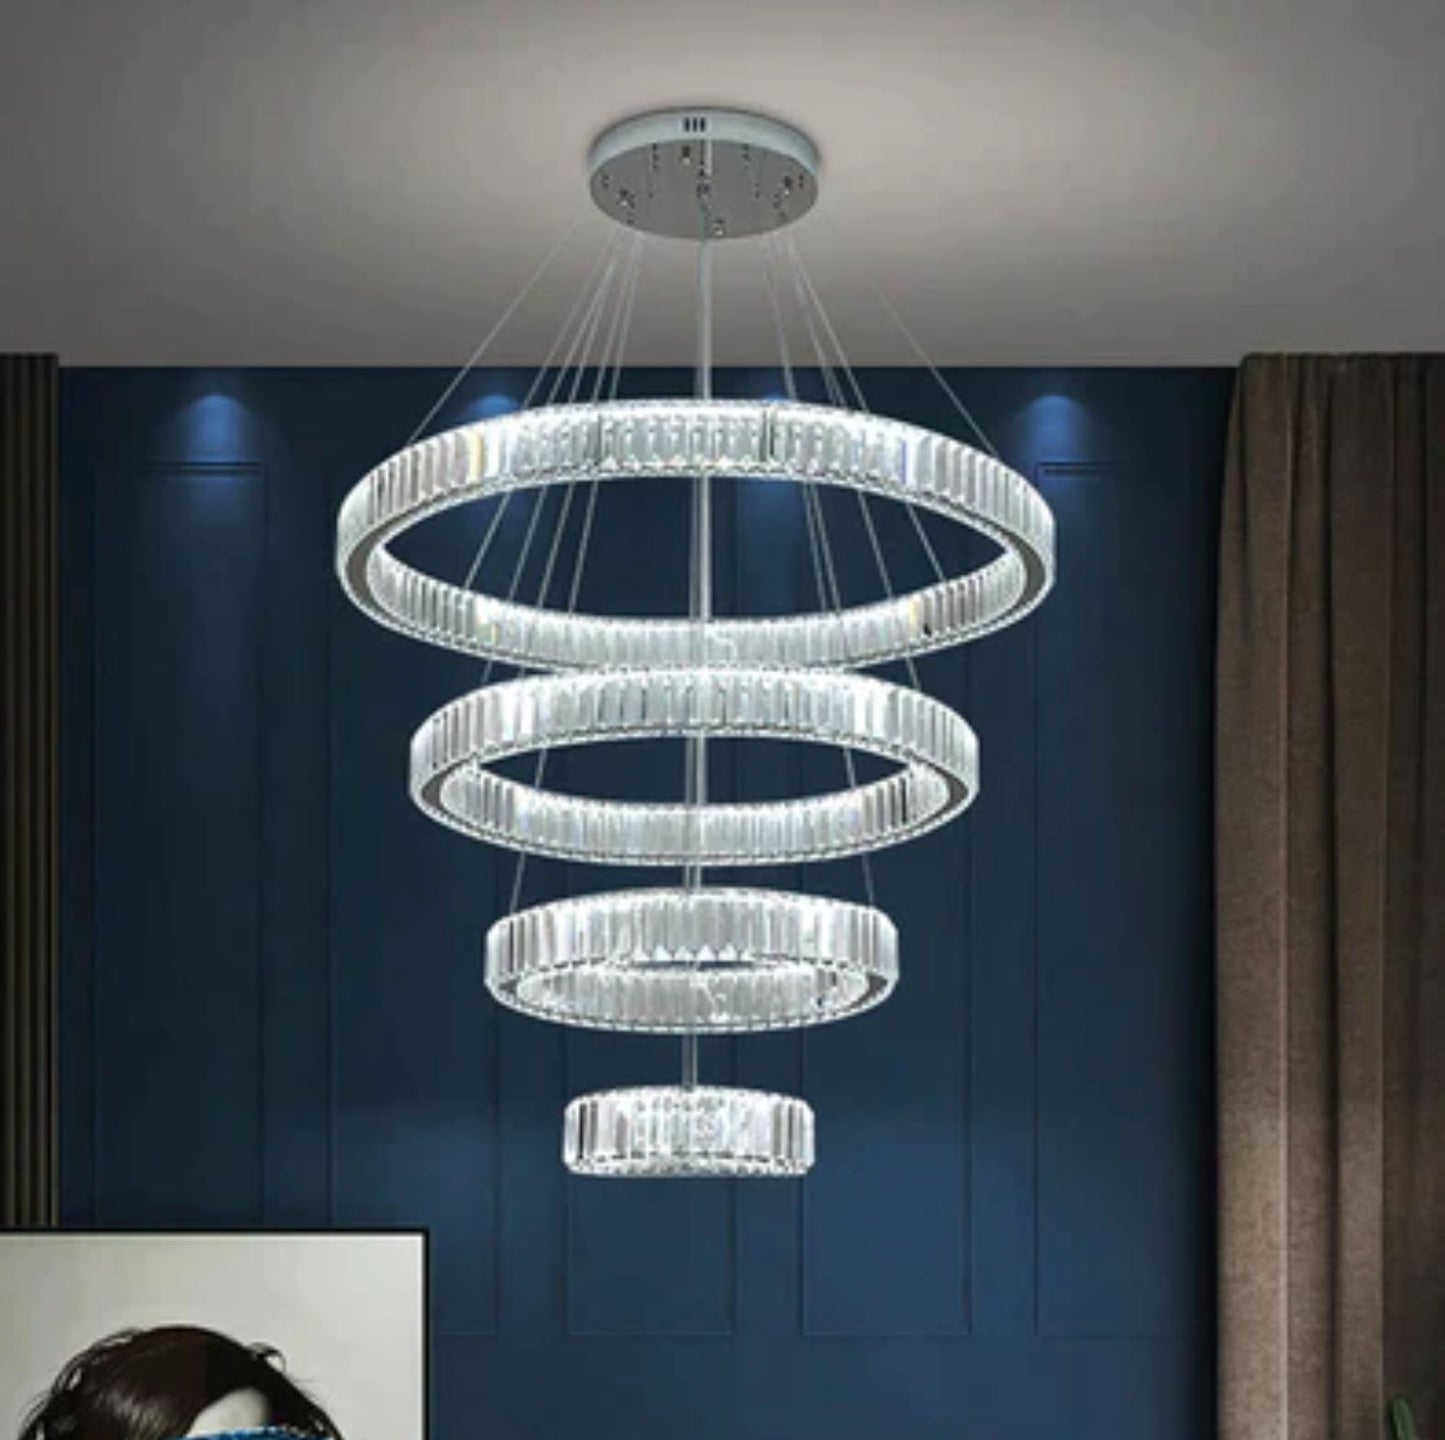 Premium High Ceiling Crystals Rings Chandeliers For 2 Story Foyer & Stair Way  luxury Led chandeliers by Gloss